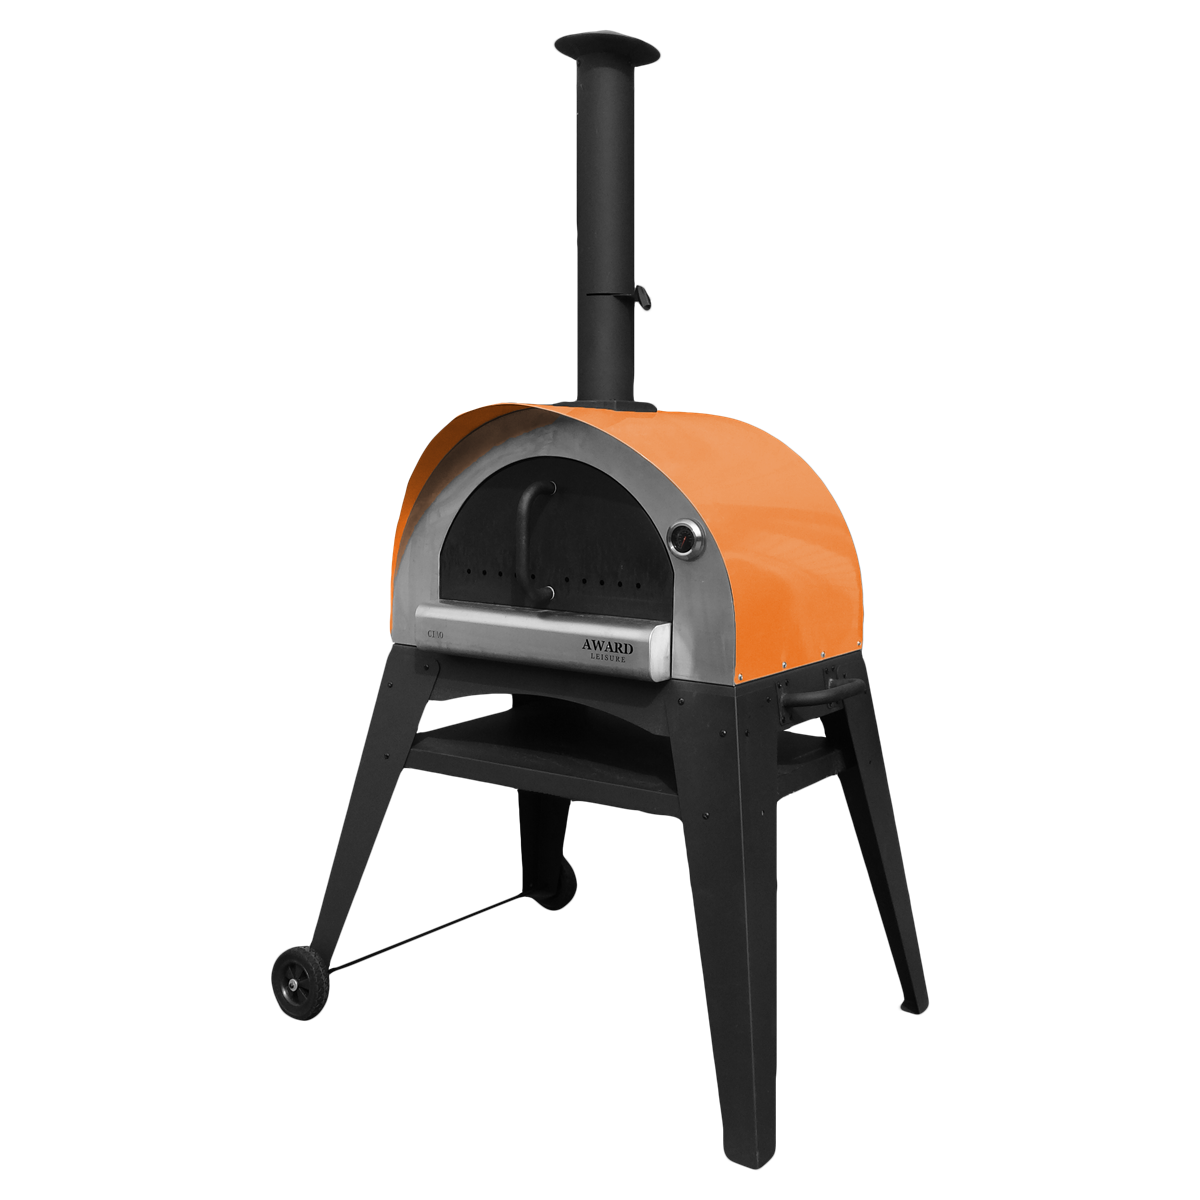 Ciao Pizza Oven